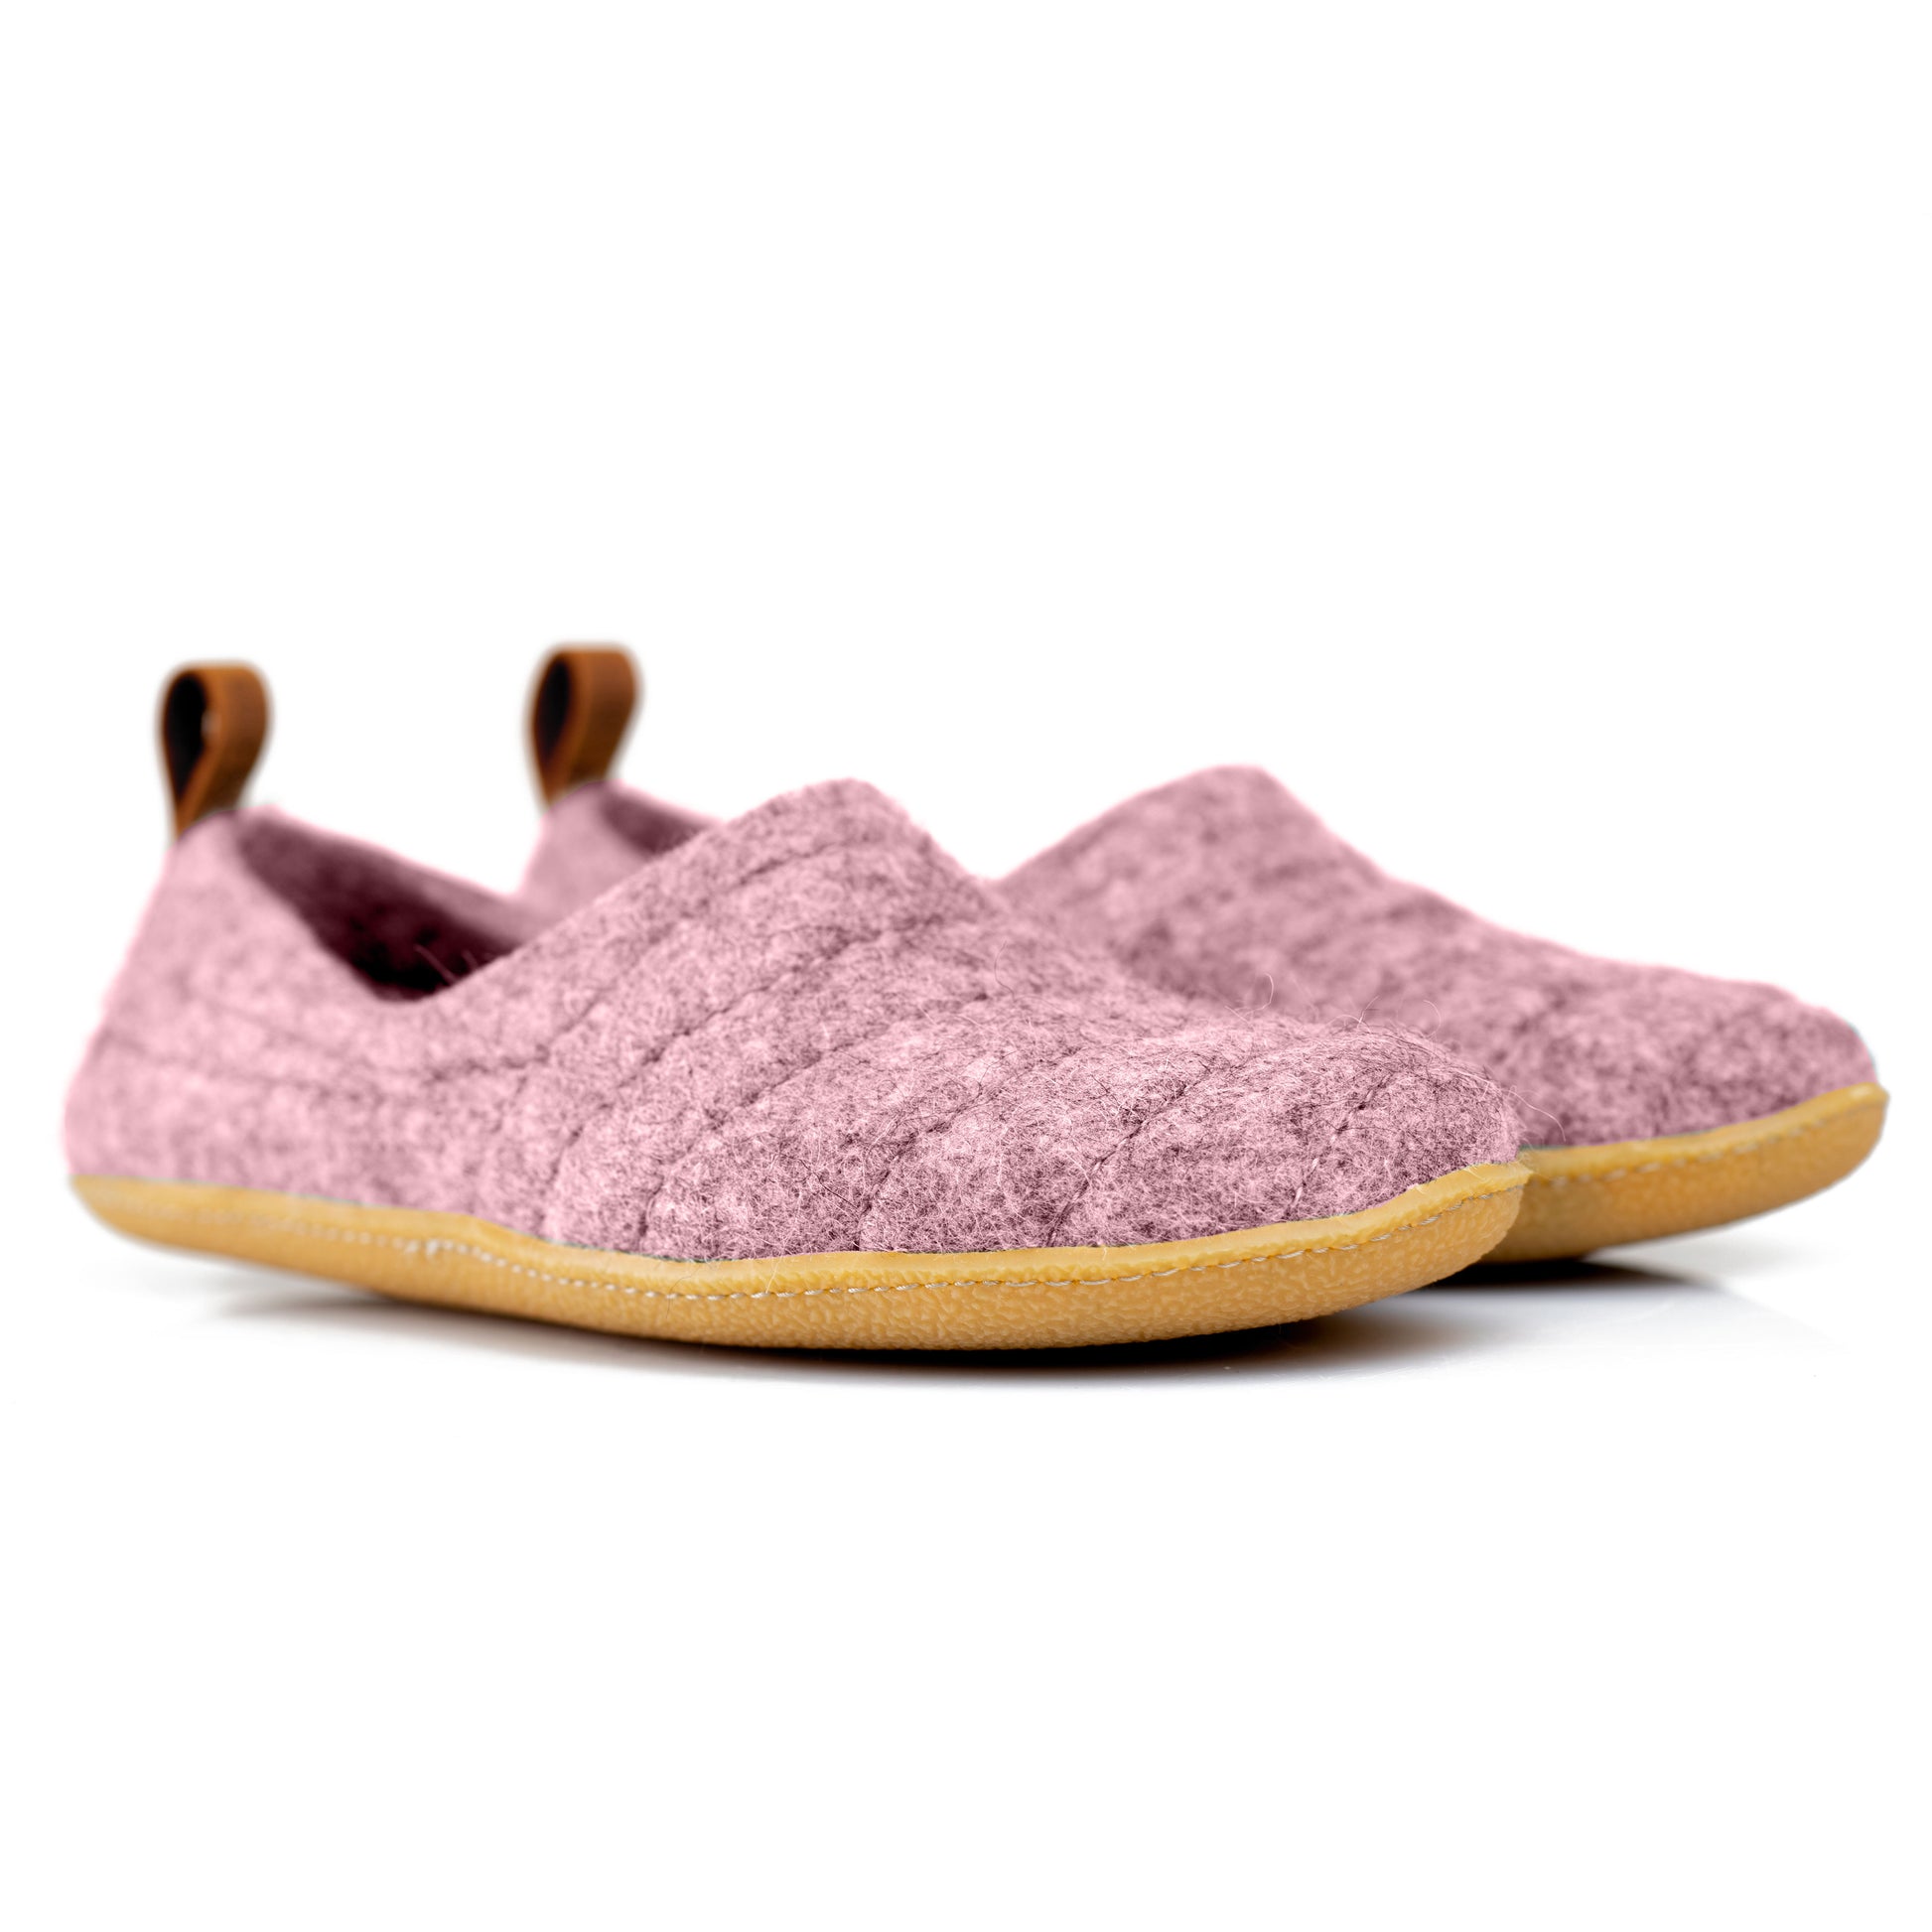 Pale Pink COCOON woolen slippers with leather pull loop and durable stitching on surface